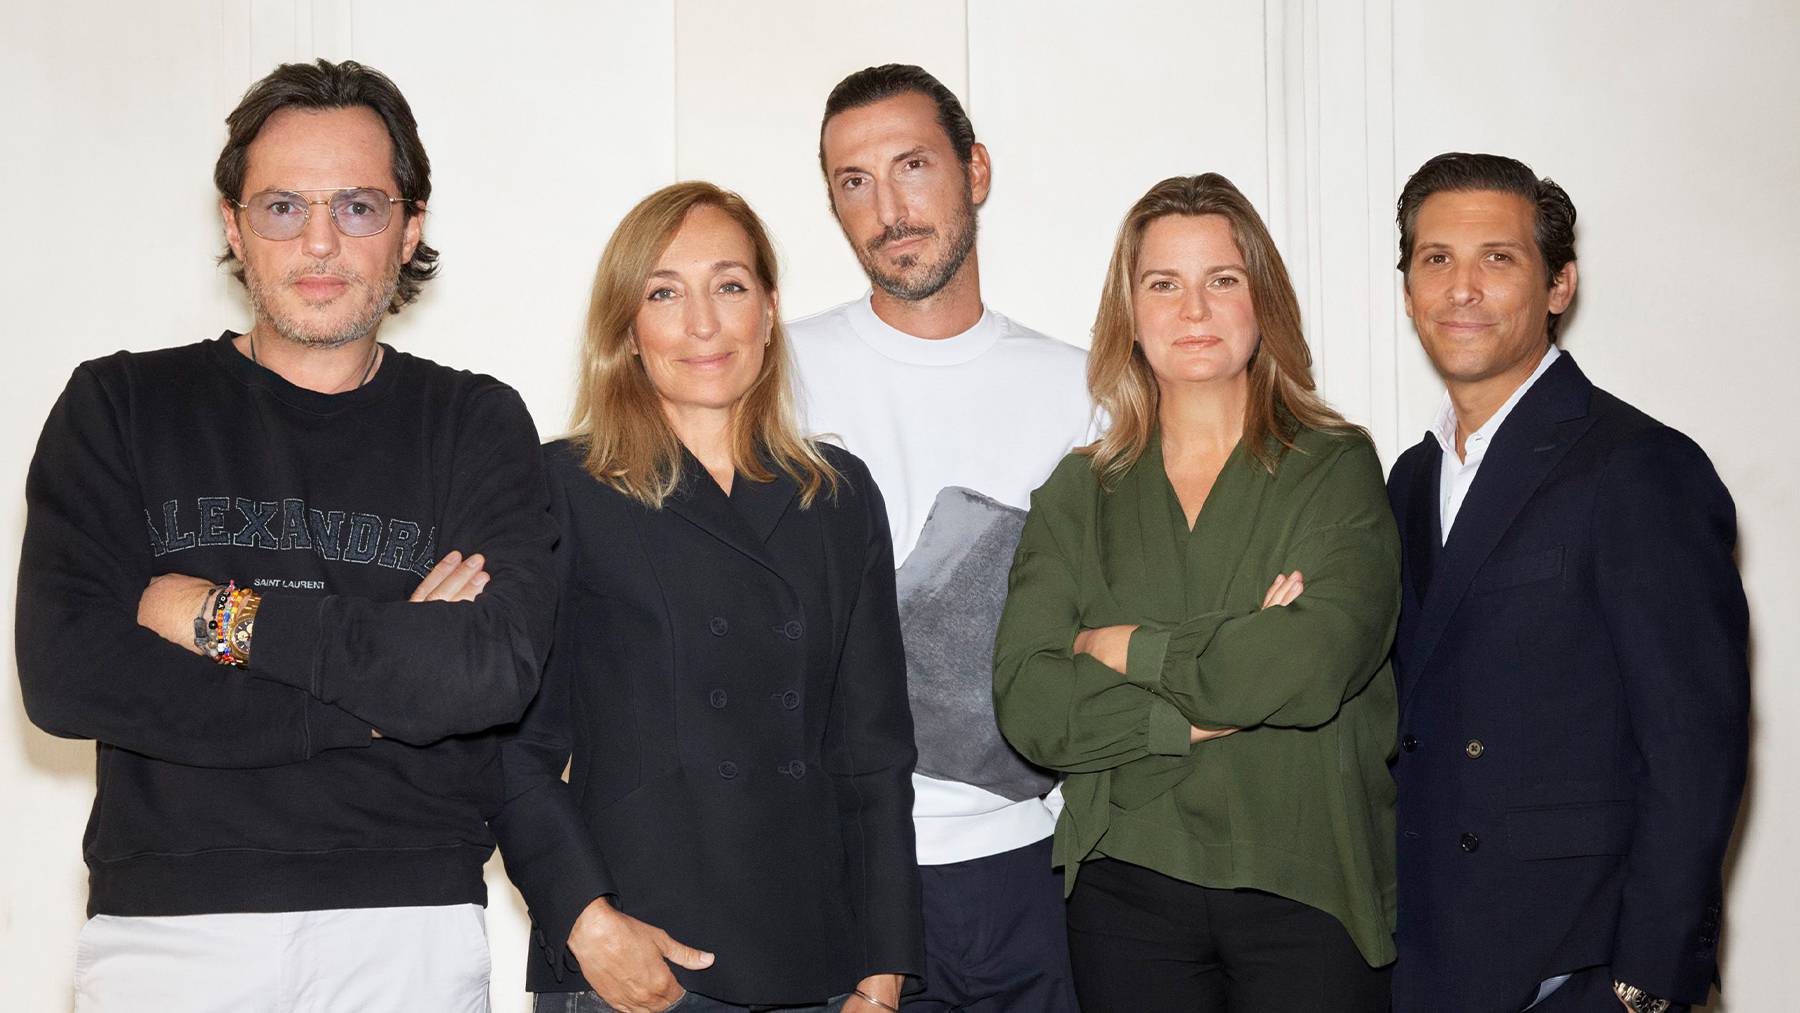 Alexandre de Betak, Benedicte Fournier Beckmann, Paco Raynal, Isabelle Chouvet and Guillaume Troncy. The Independents.